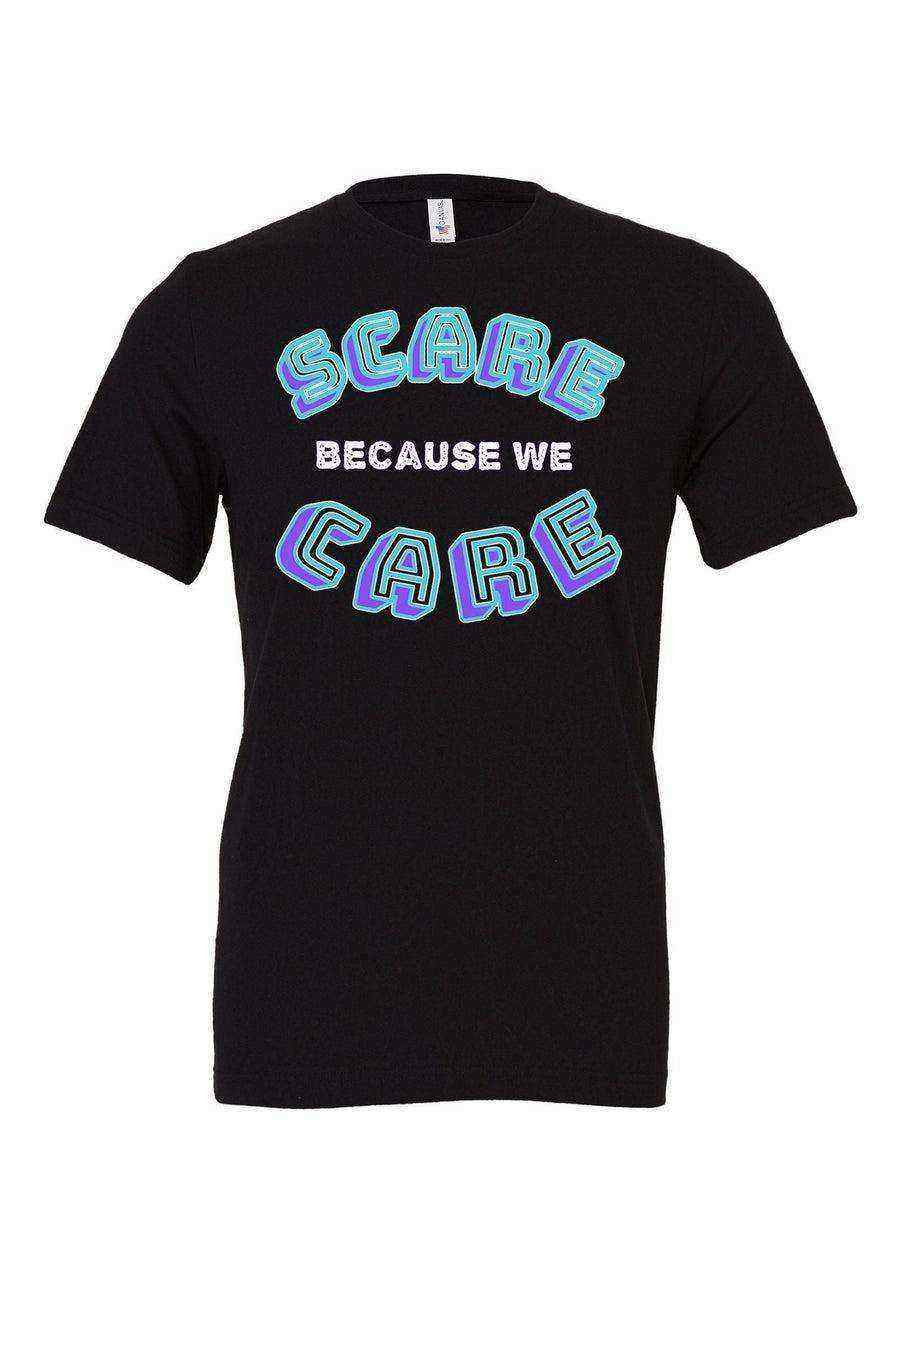 Womens | We Scare Because We Care Monsters Inc Shirt - Dylan's Tees